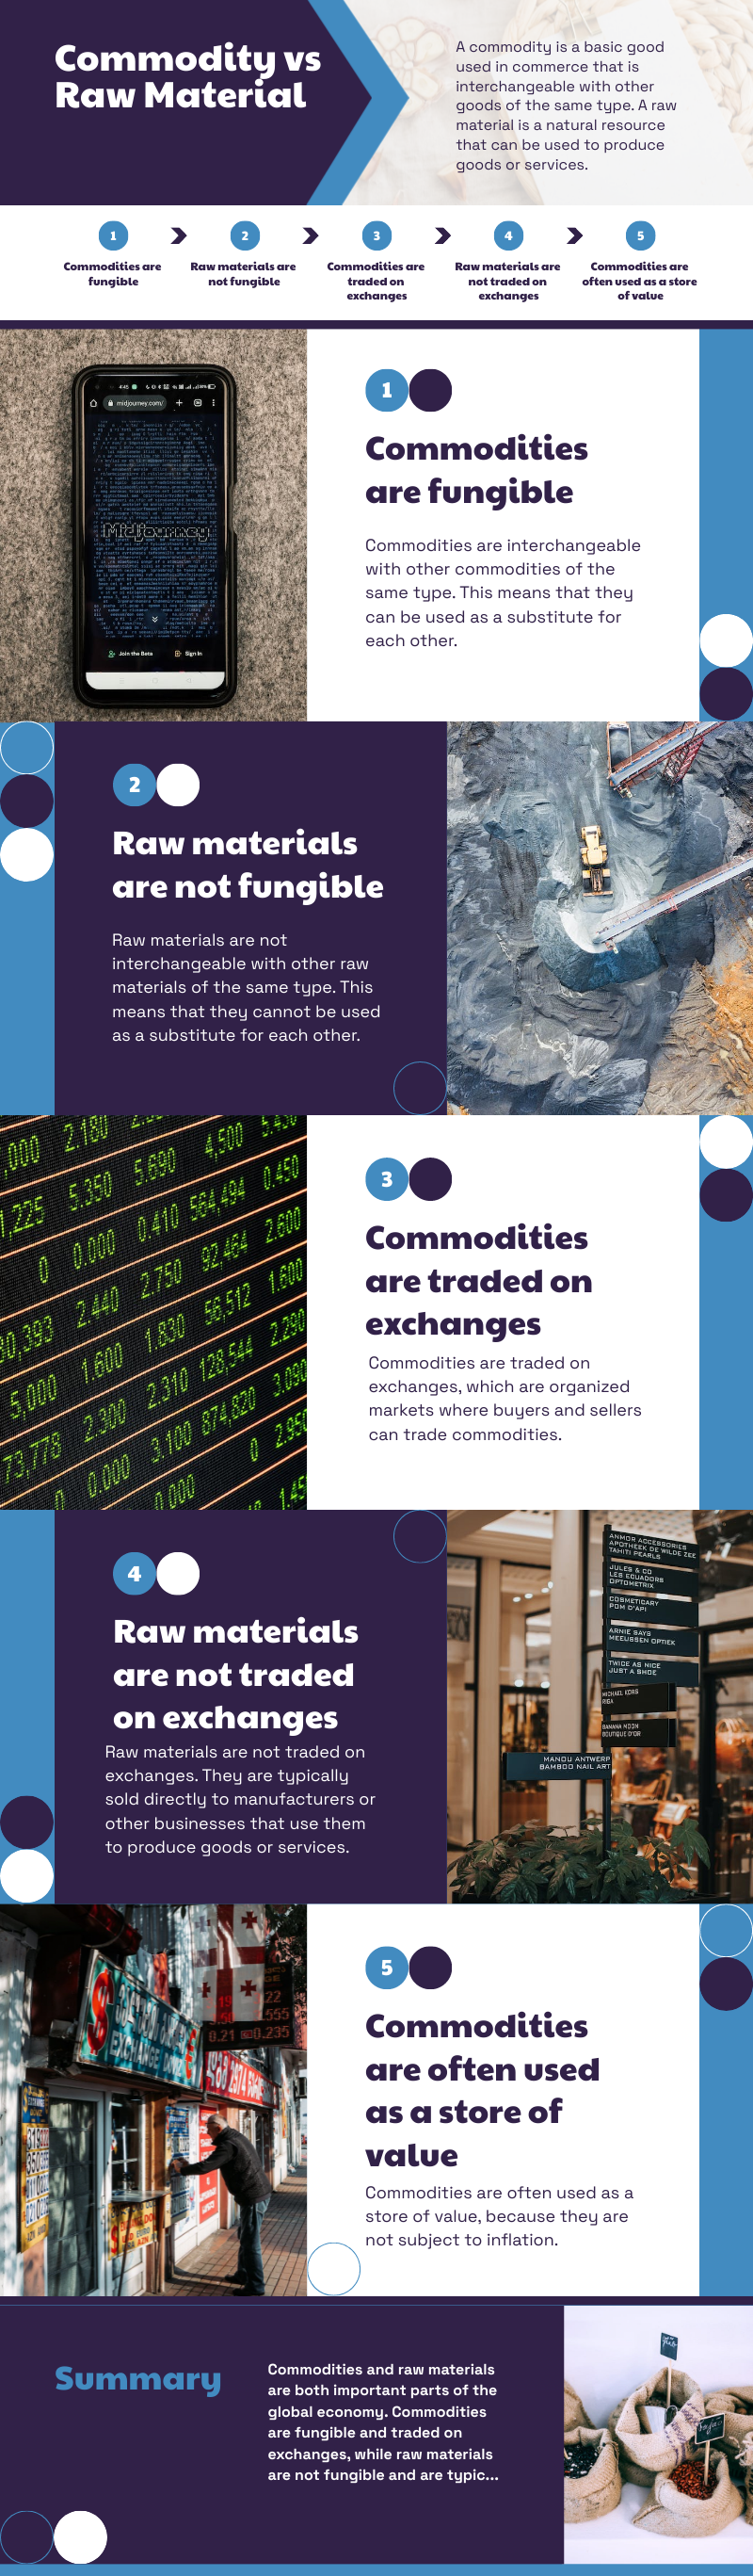 infographic for commodities vs raw materials 